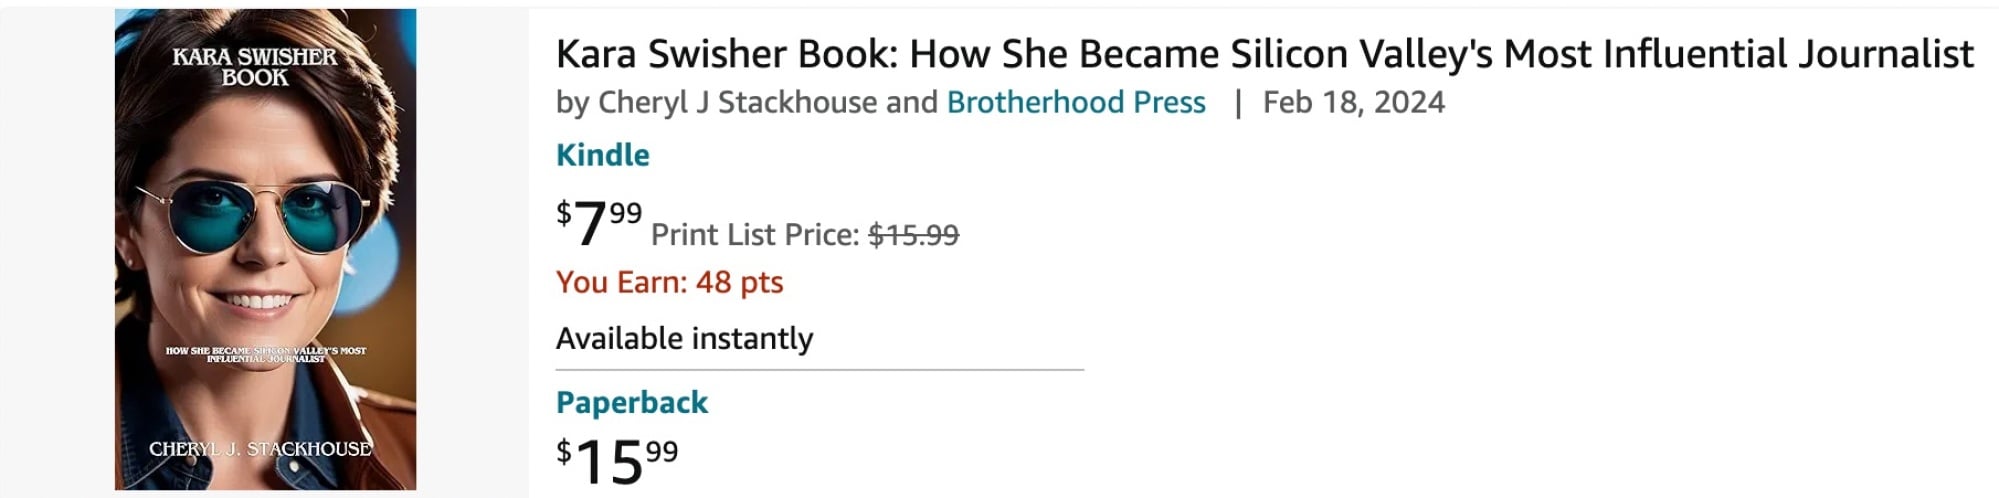 a book about Kara Swisher on Amazon featuring an AI-generated image of Swisher